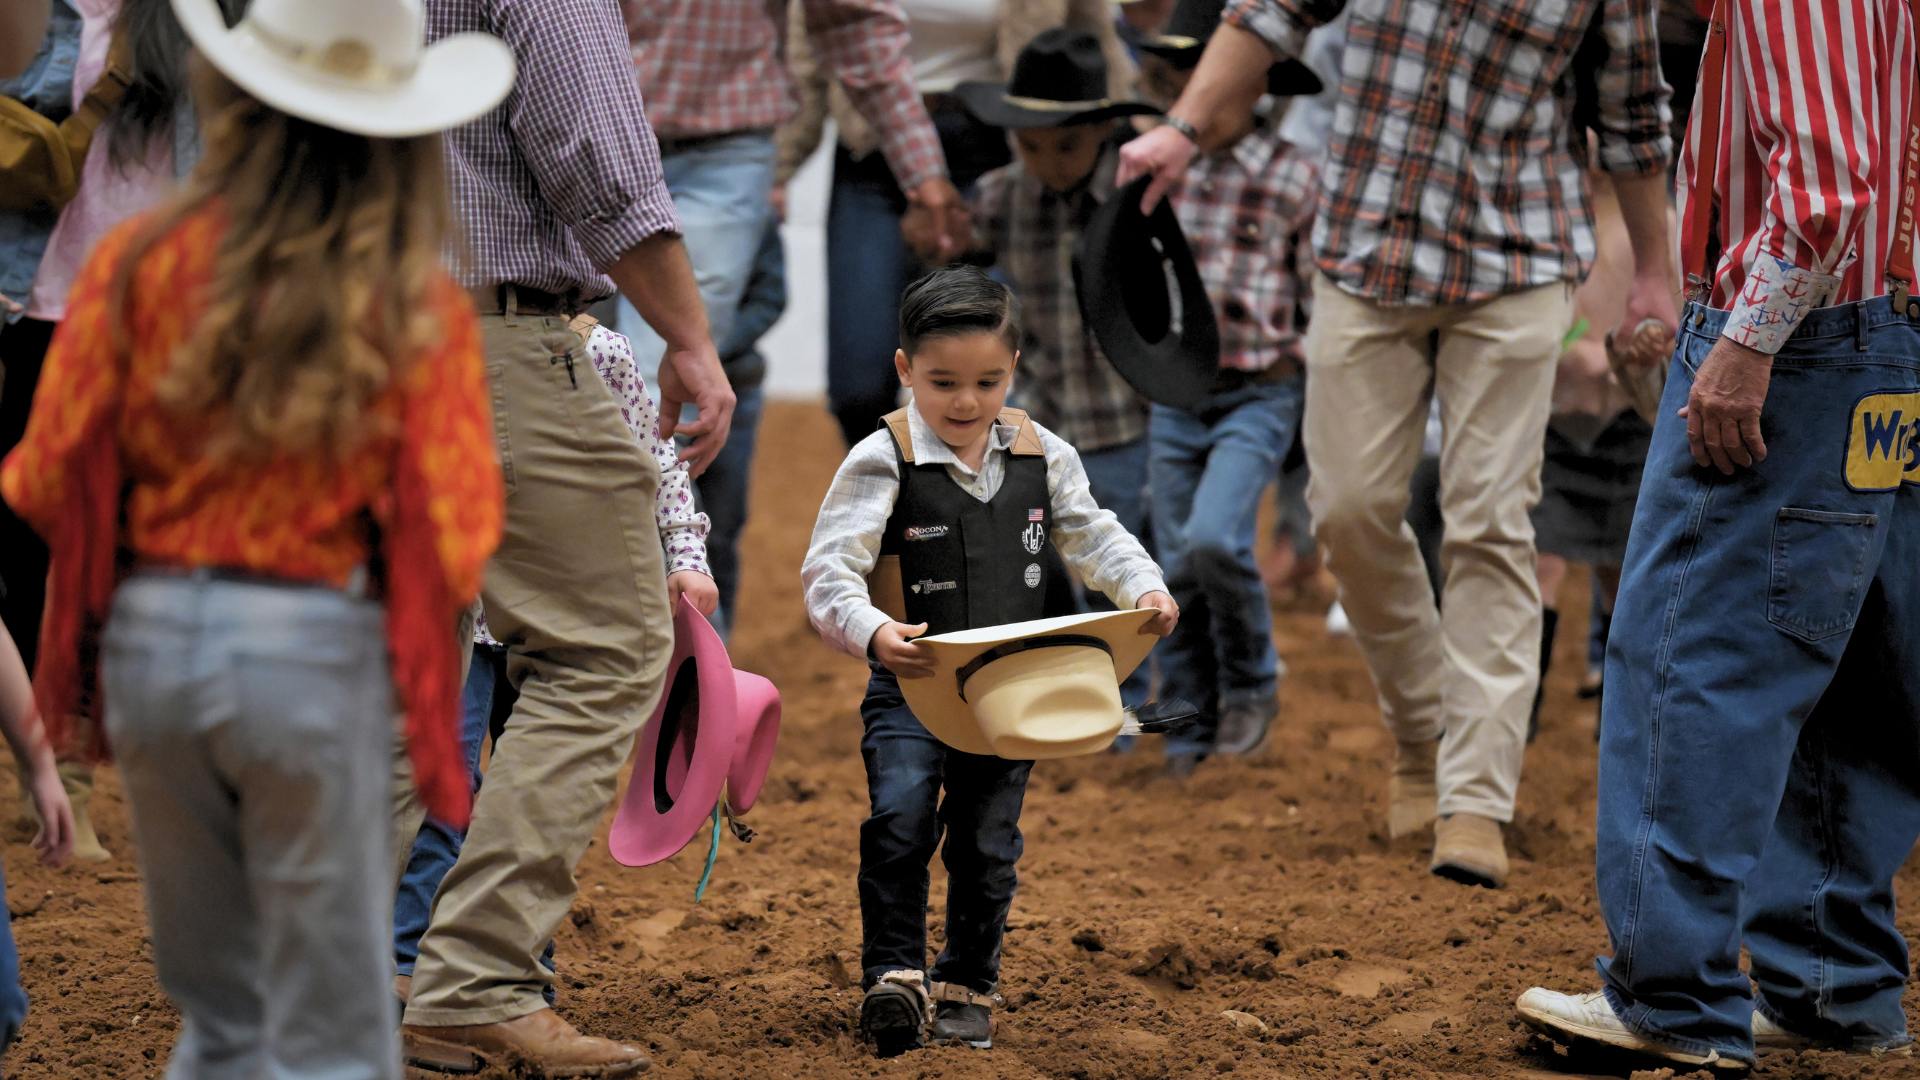 The Sandhills Stock Show & Rodeo takes places from January 4-13, 2024 in Odessa, TX at the Ector County Coliseum. Find tickets here!